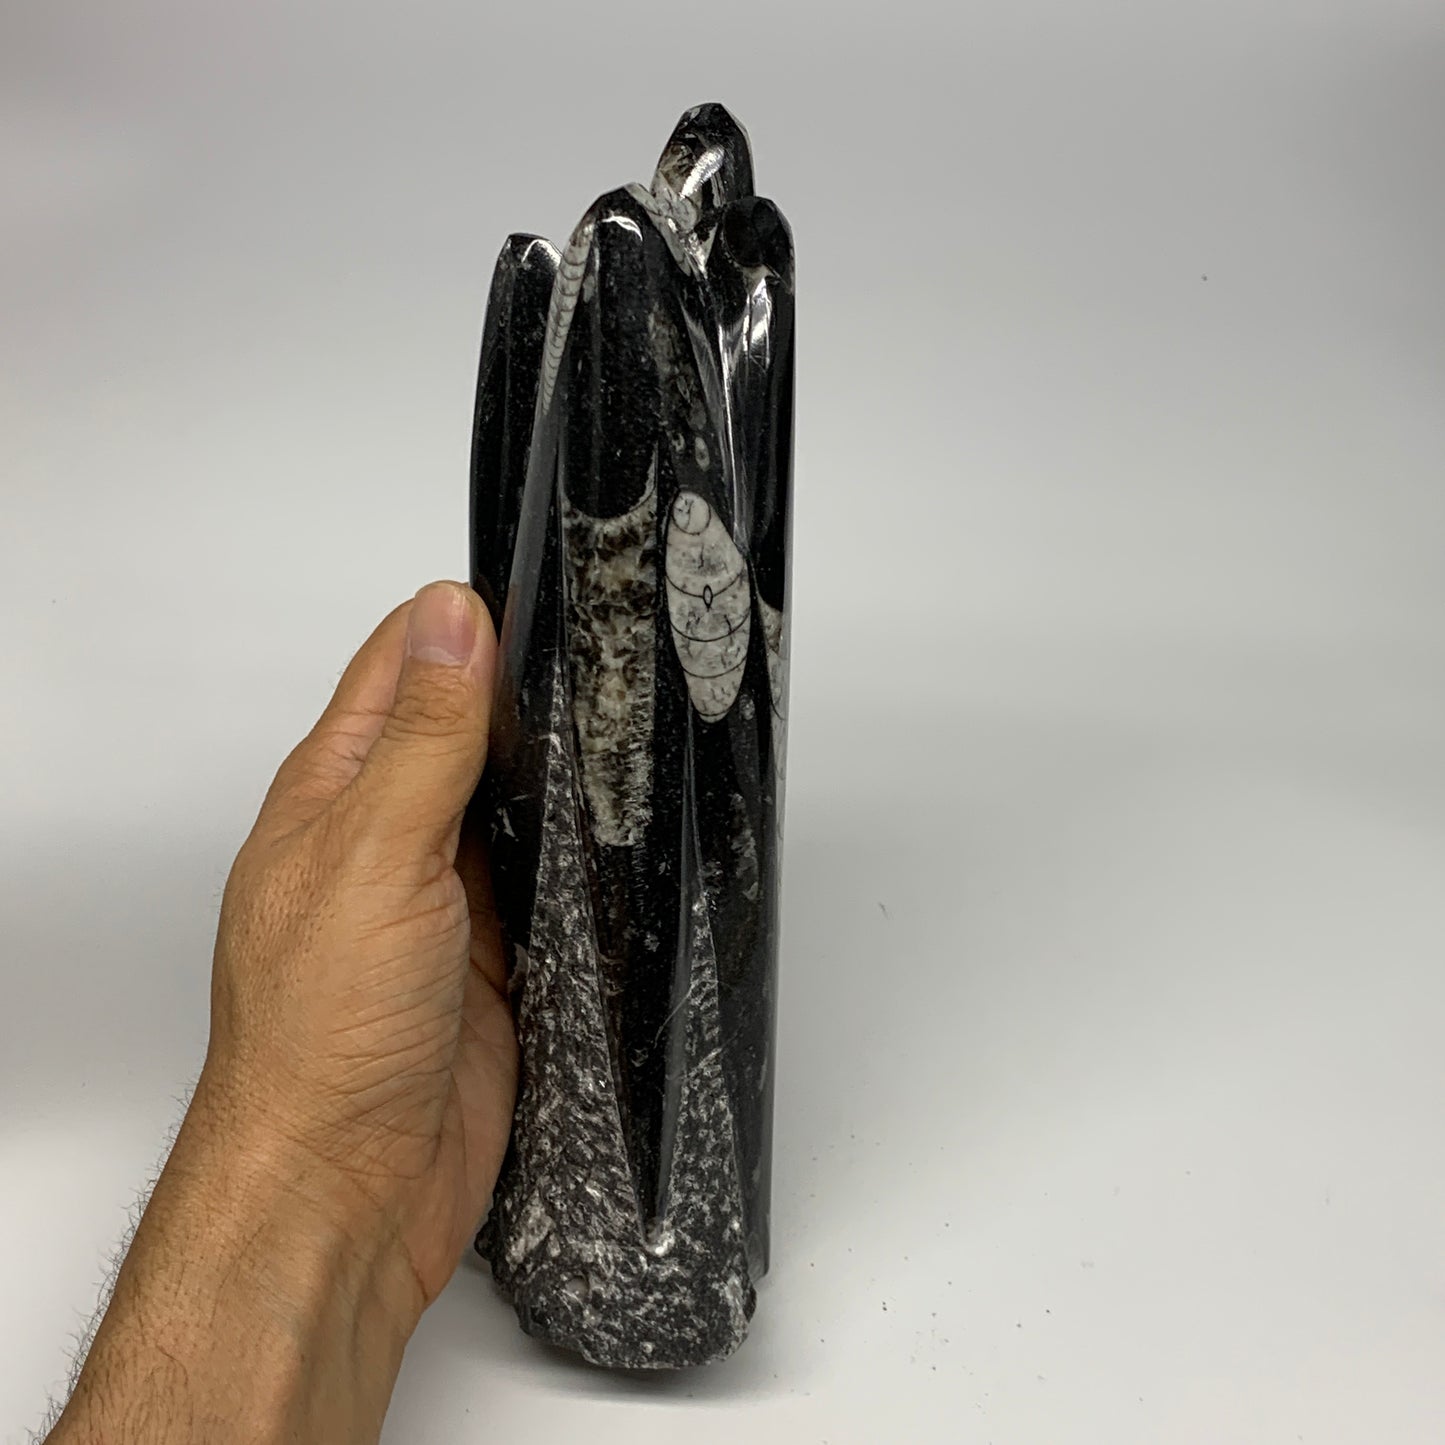 1295g, 8.75"x2.8"x2.2" Black Fossils Orthoceras Sculpture Tower @Morocco, B23424